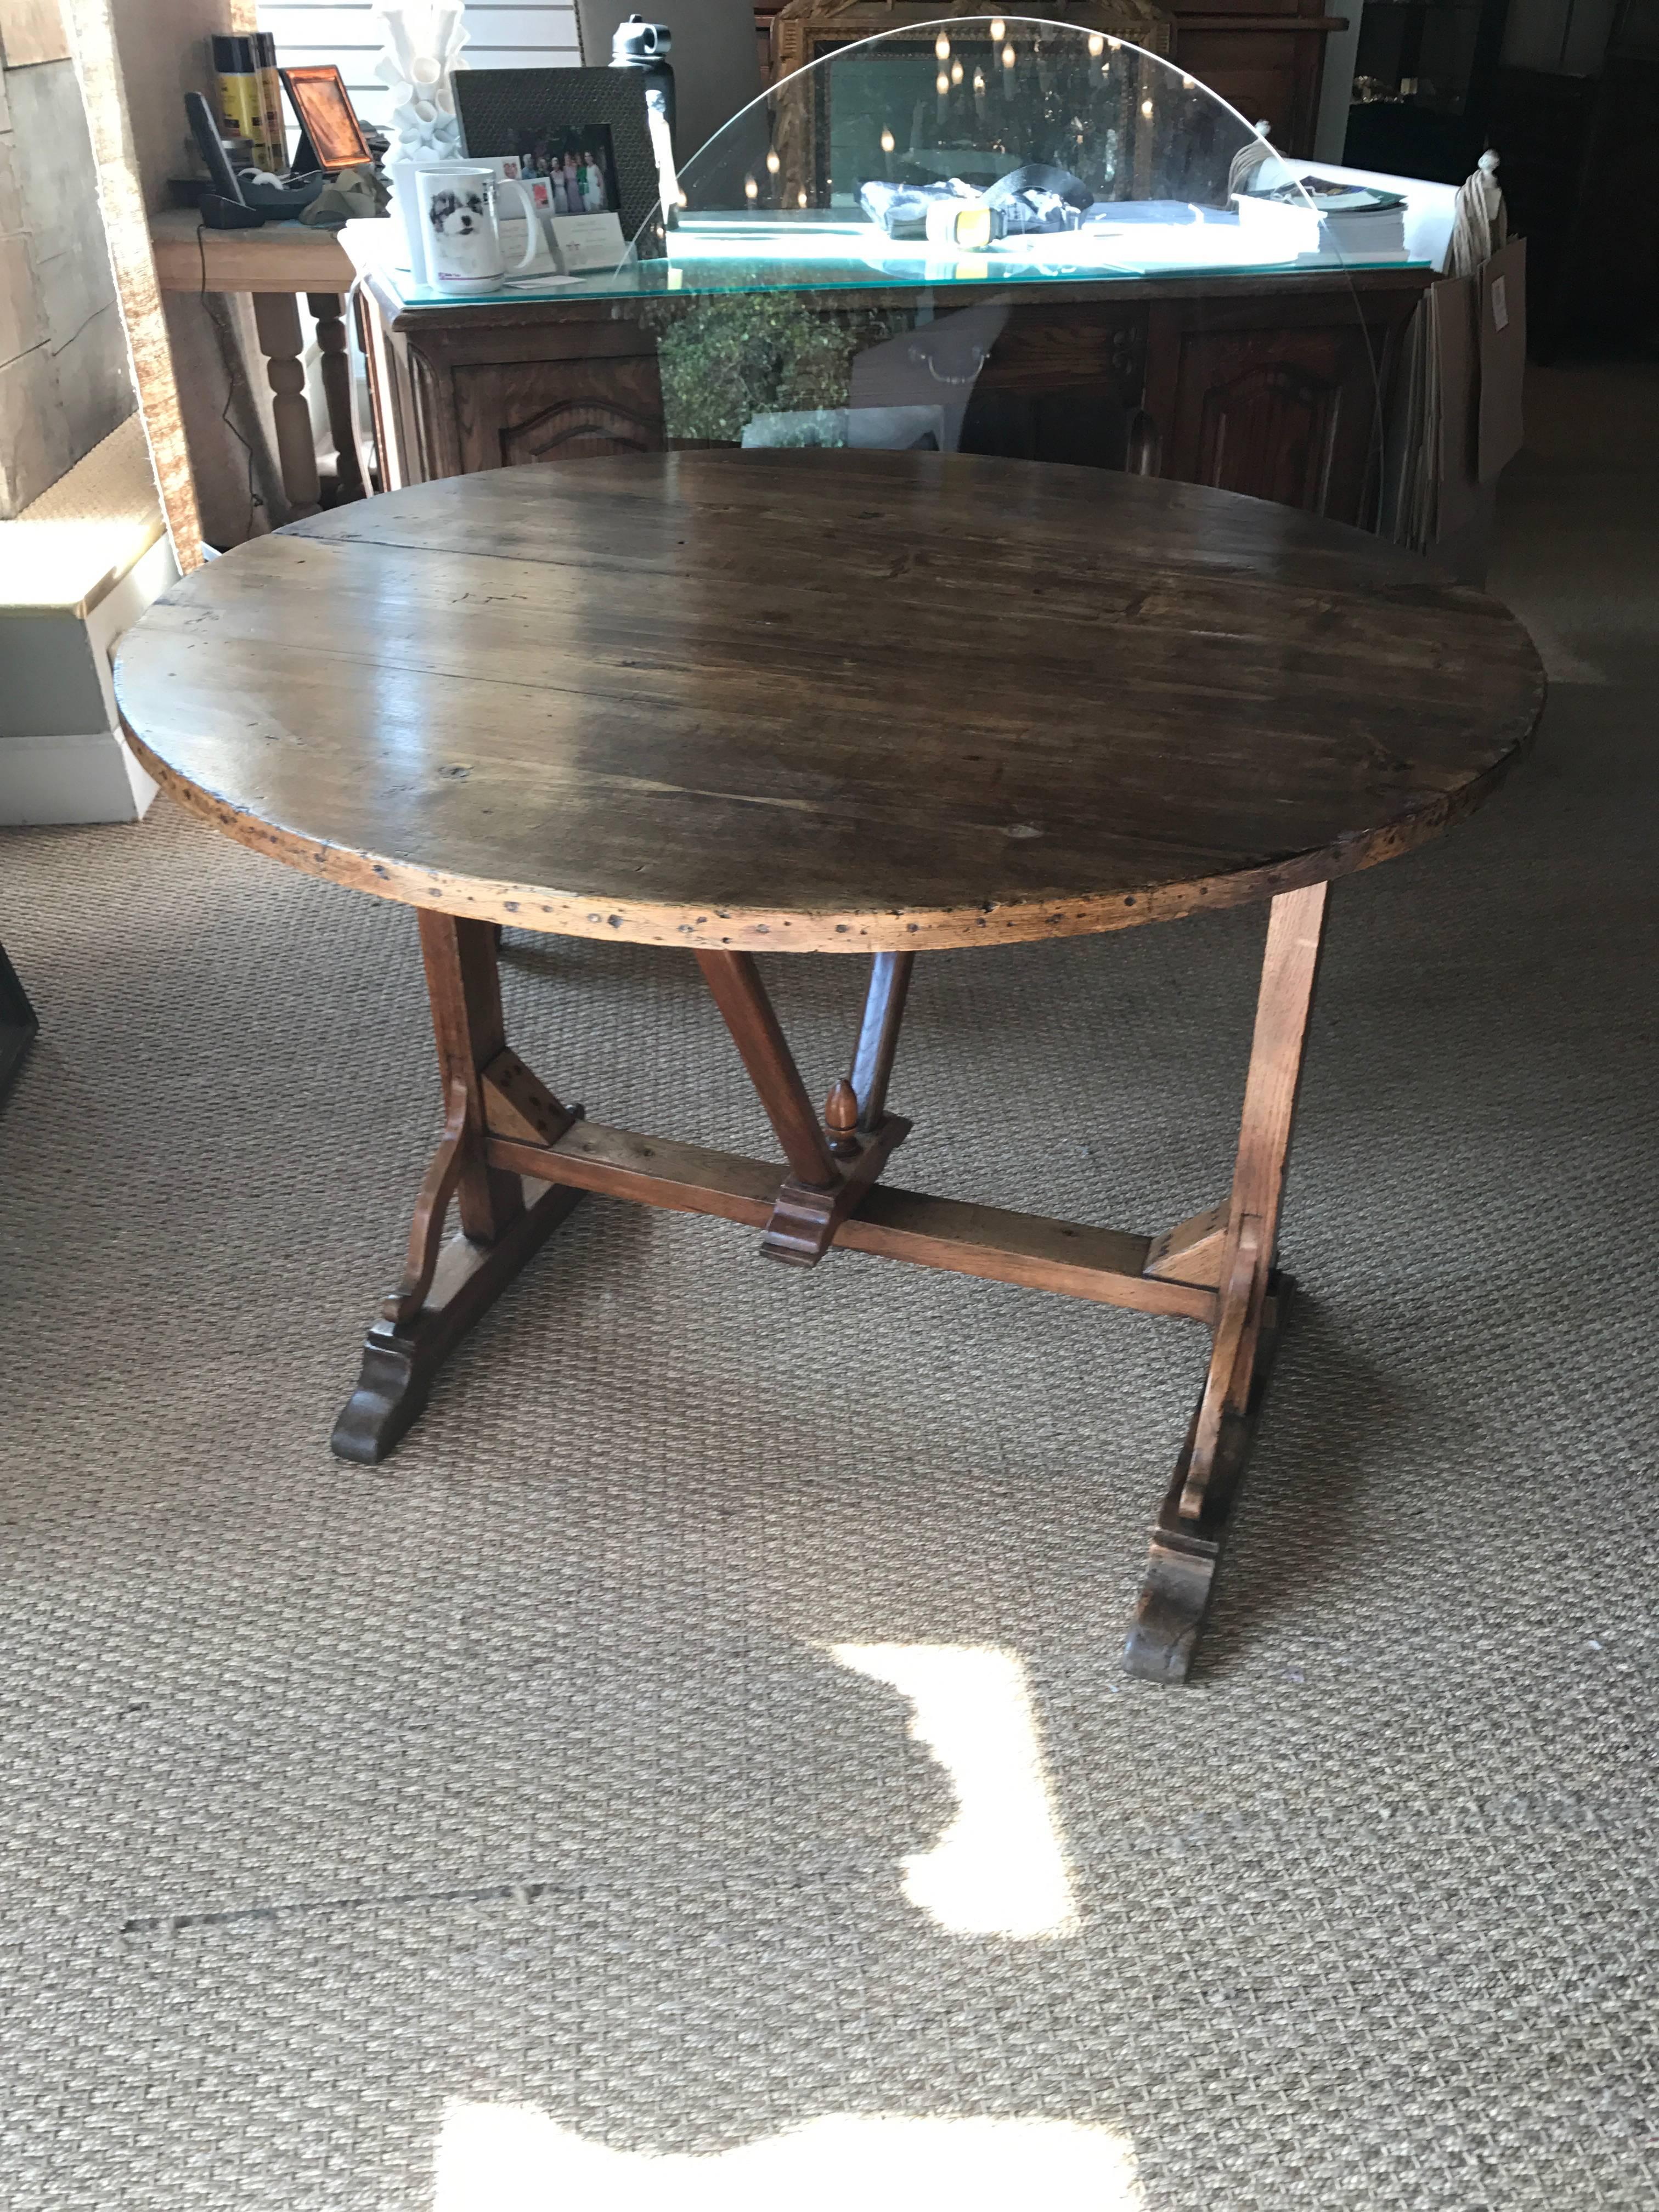 19th century vendange table made of chestnut. From the Bordeaux region of France.